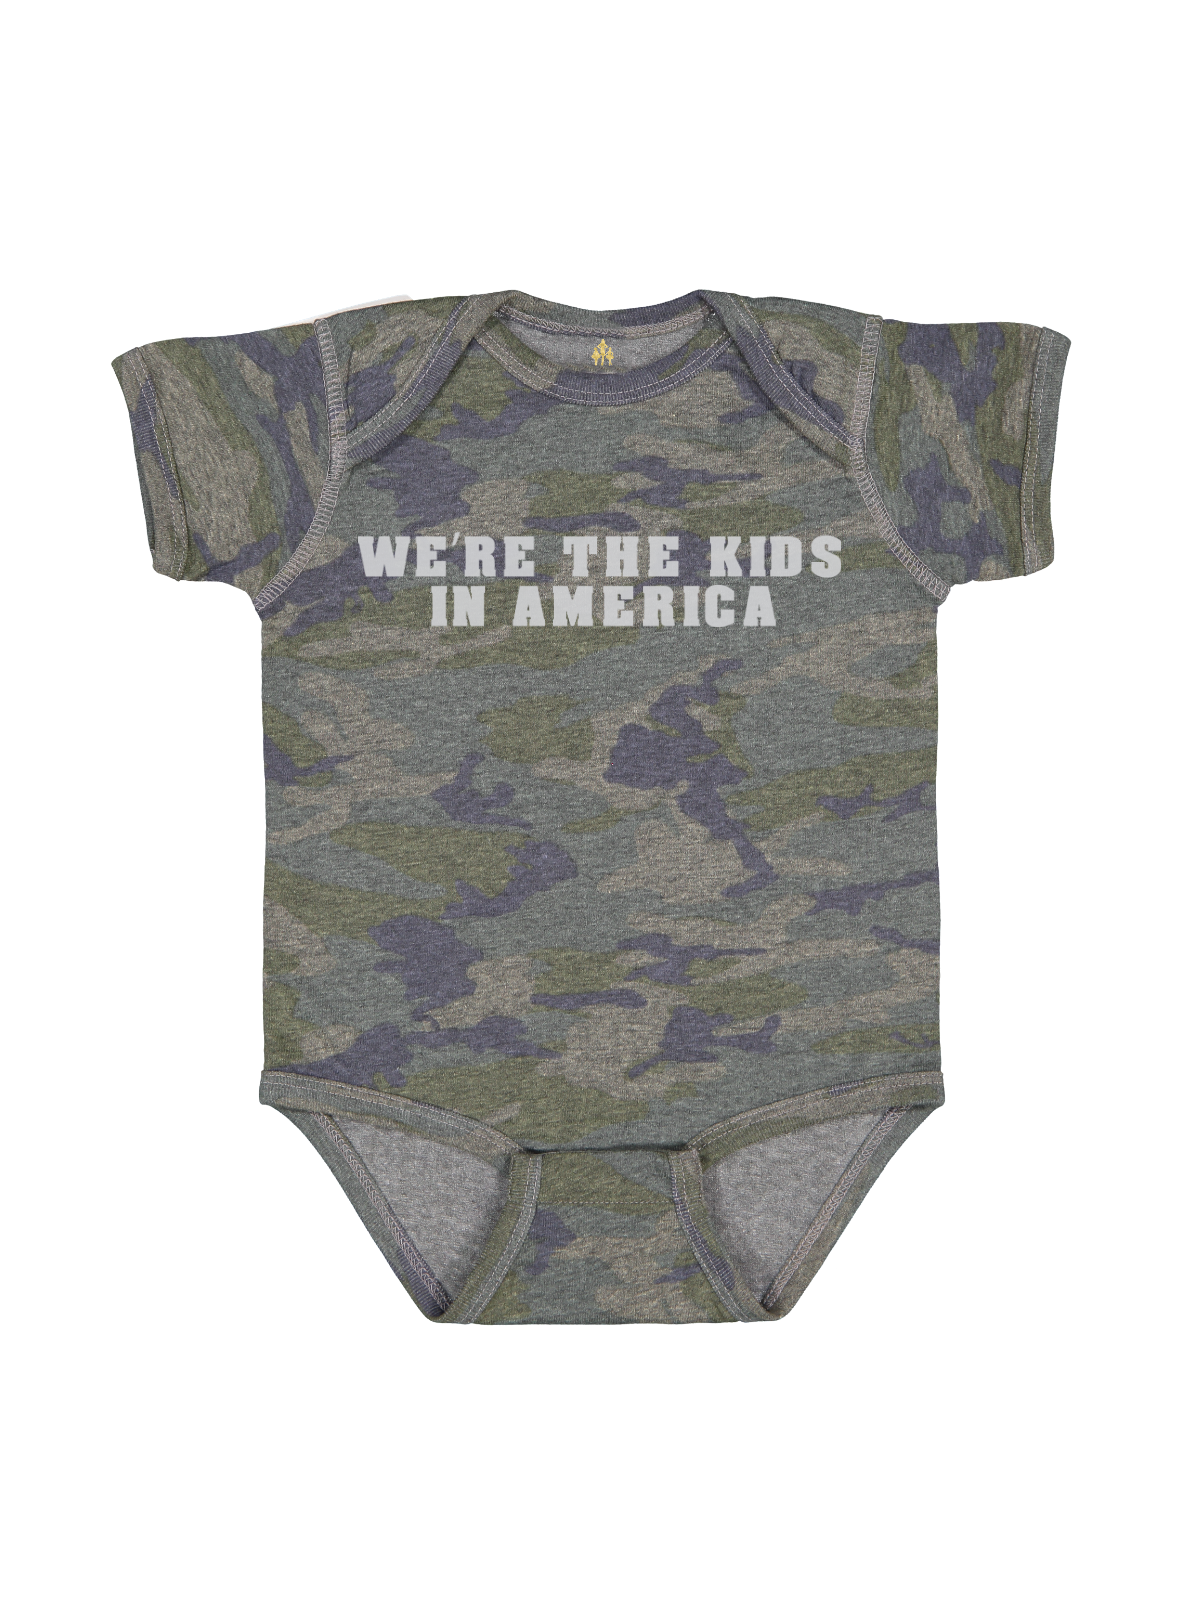 We're the Kids in America Infant Activist Outfit